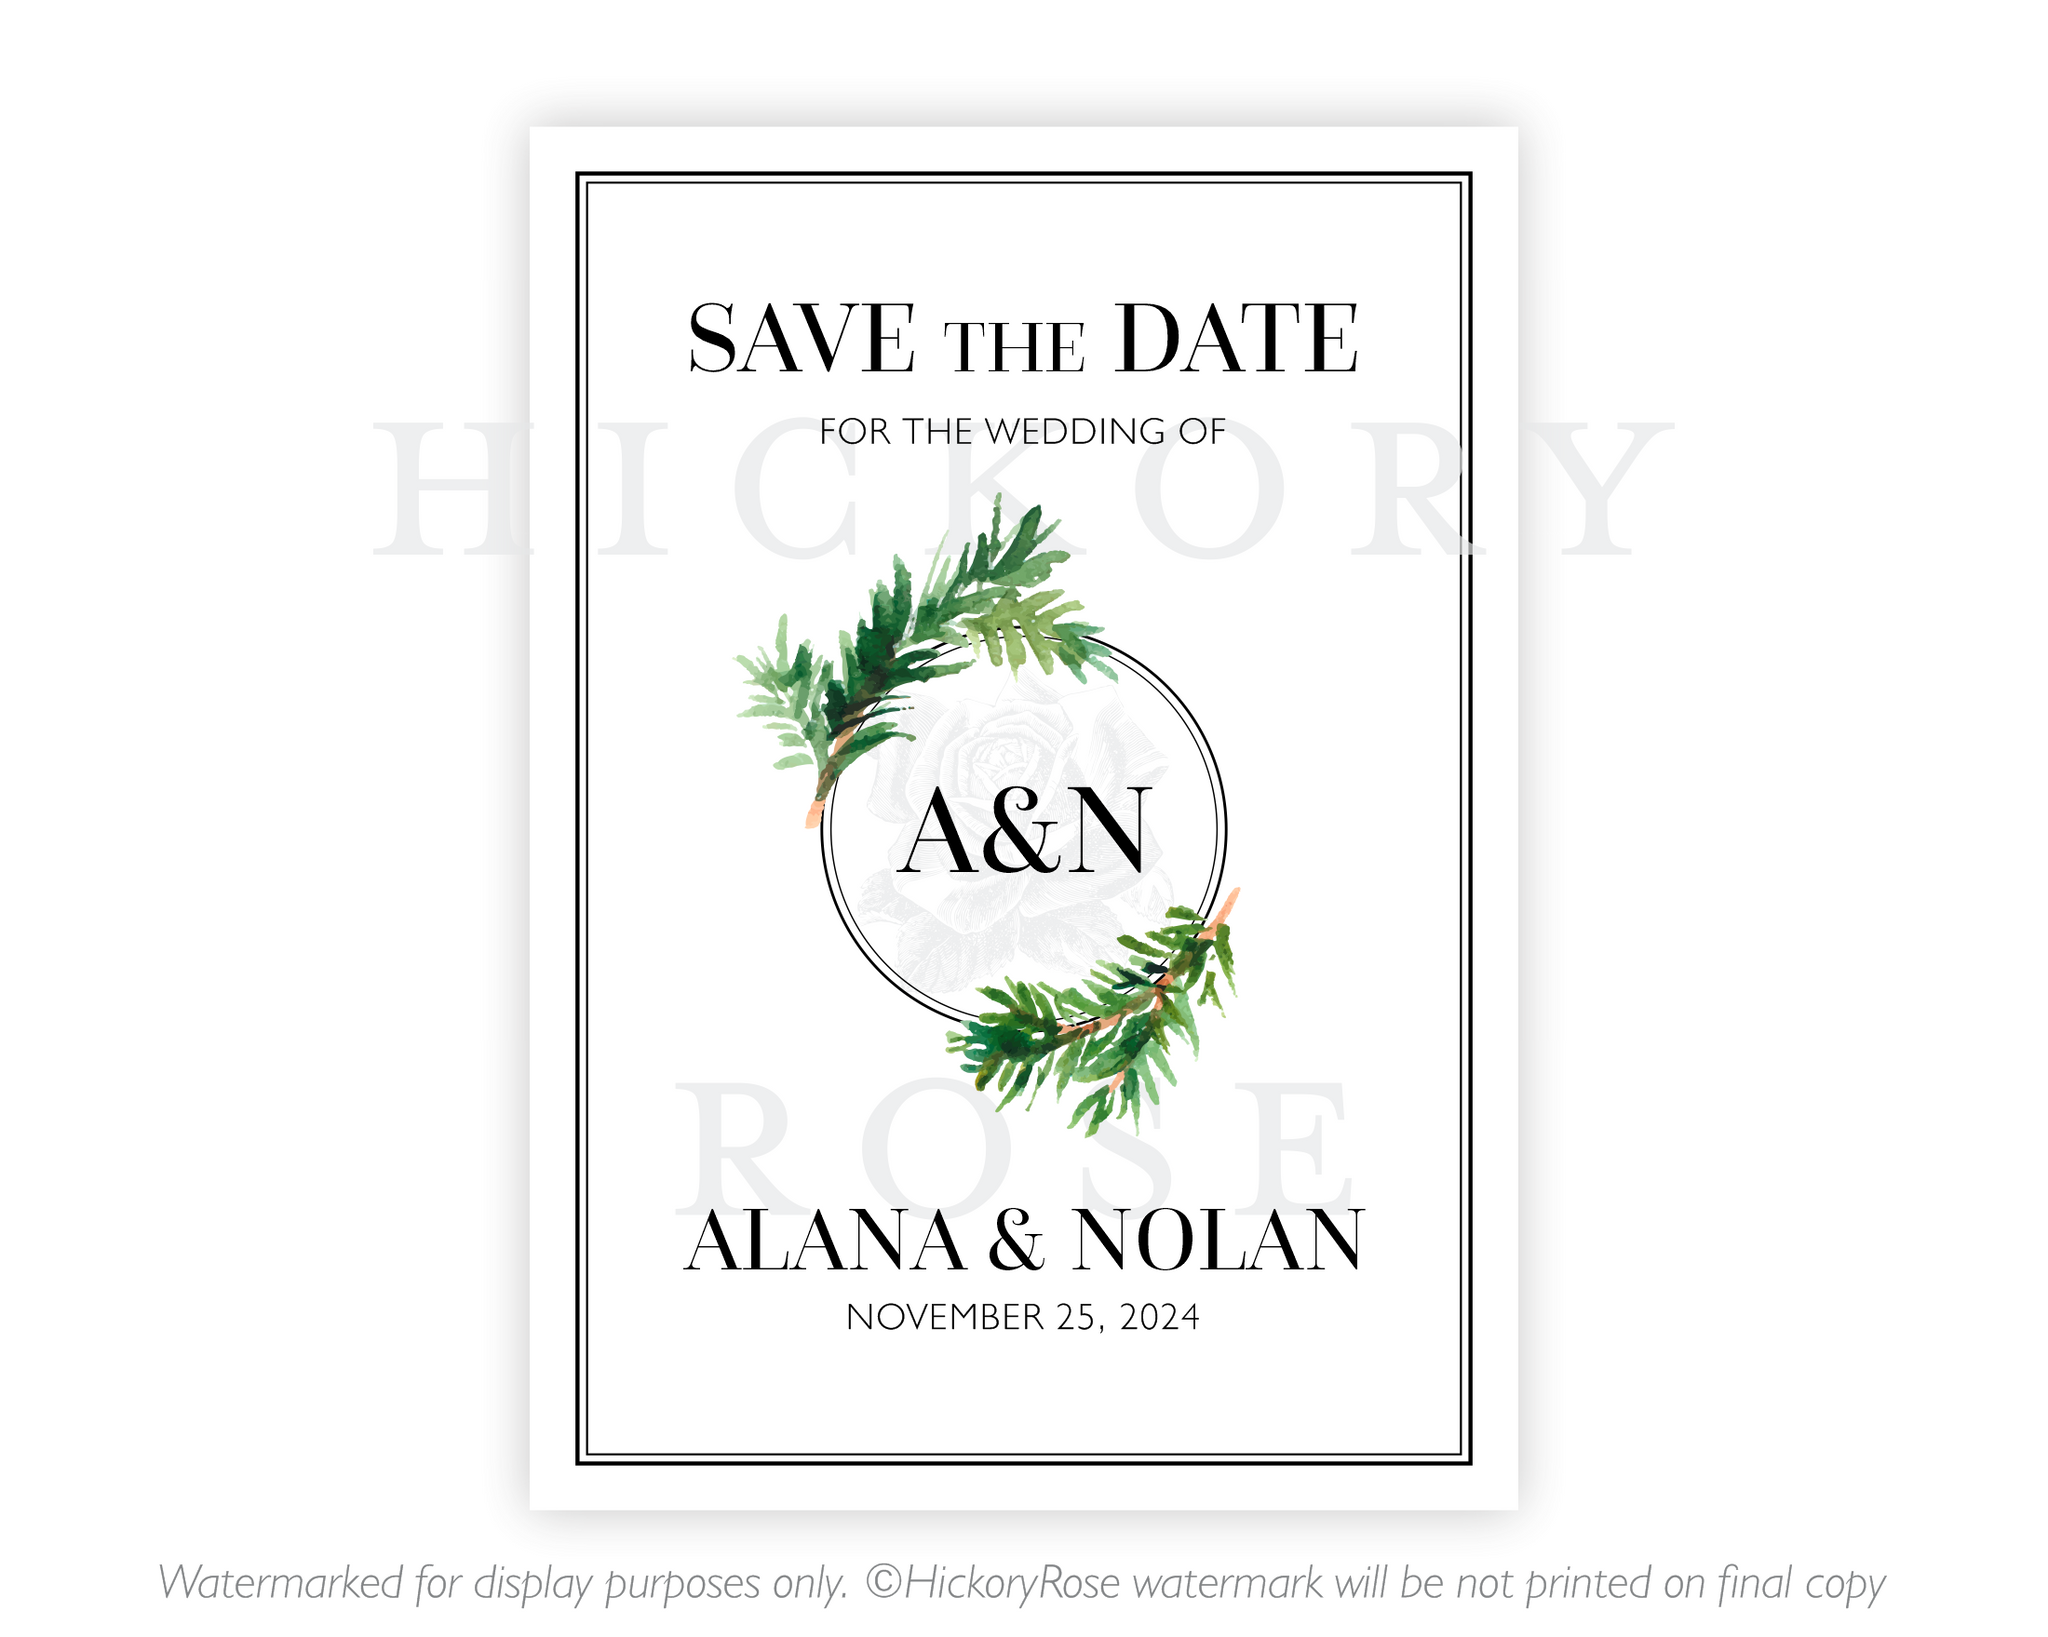 Rustic Pine | Save the Date Cards